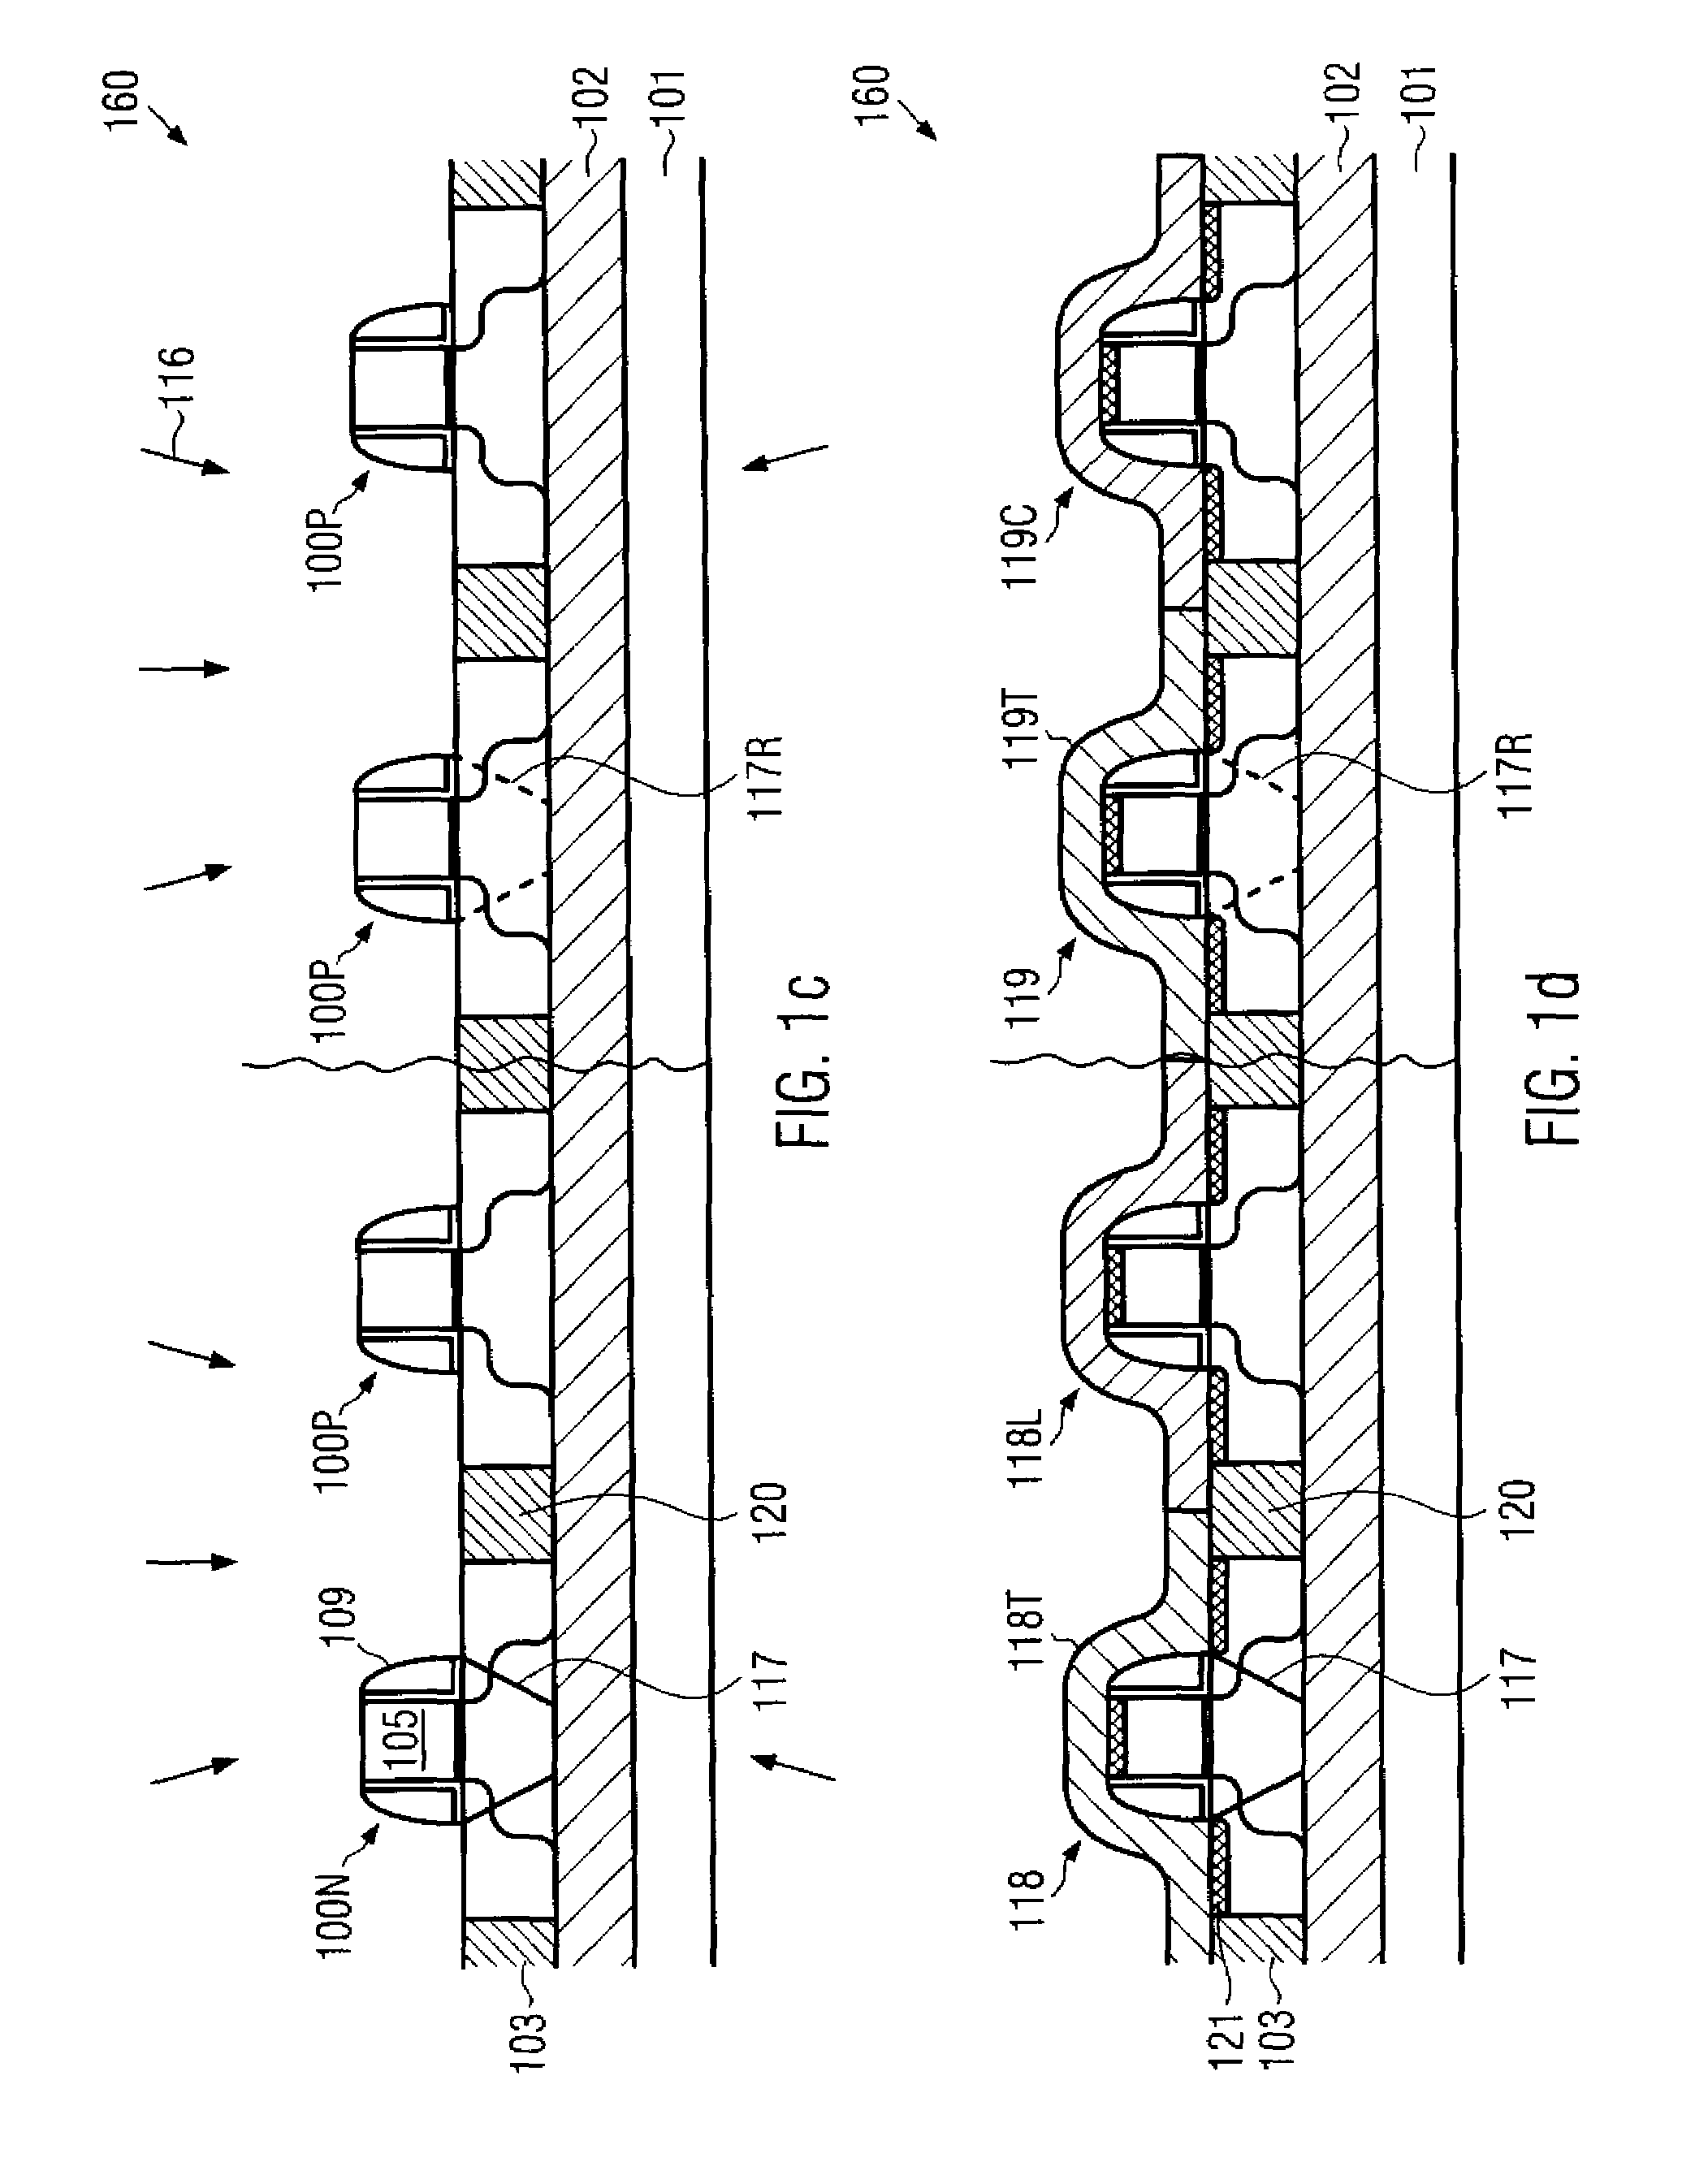 Semiconductor device having stressed etch stop layers of different intrinsic stress in combination with PN junctions of different design in different device regions